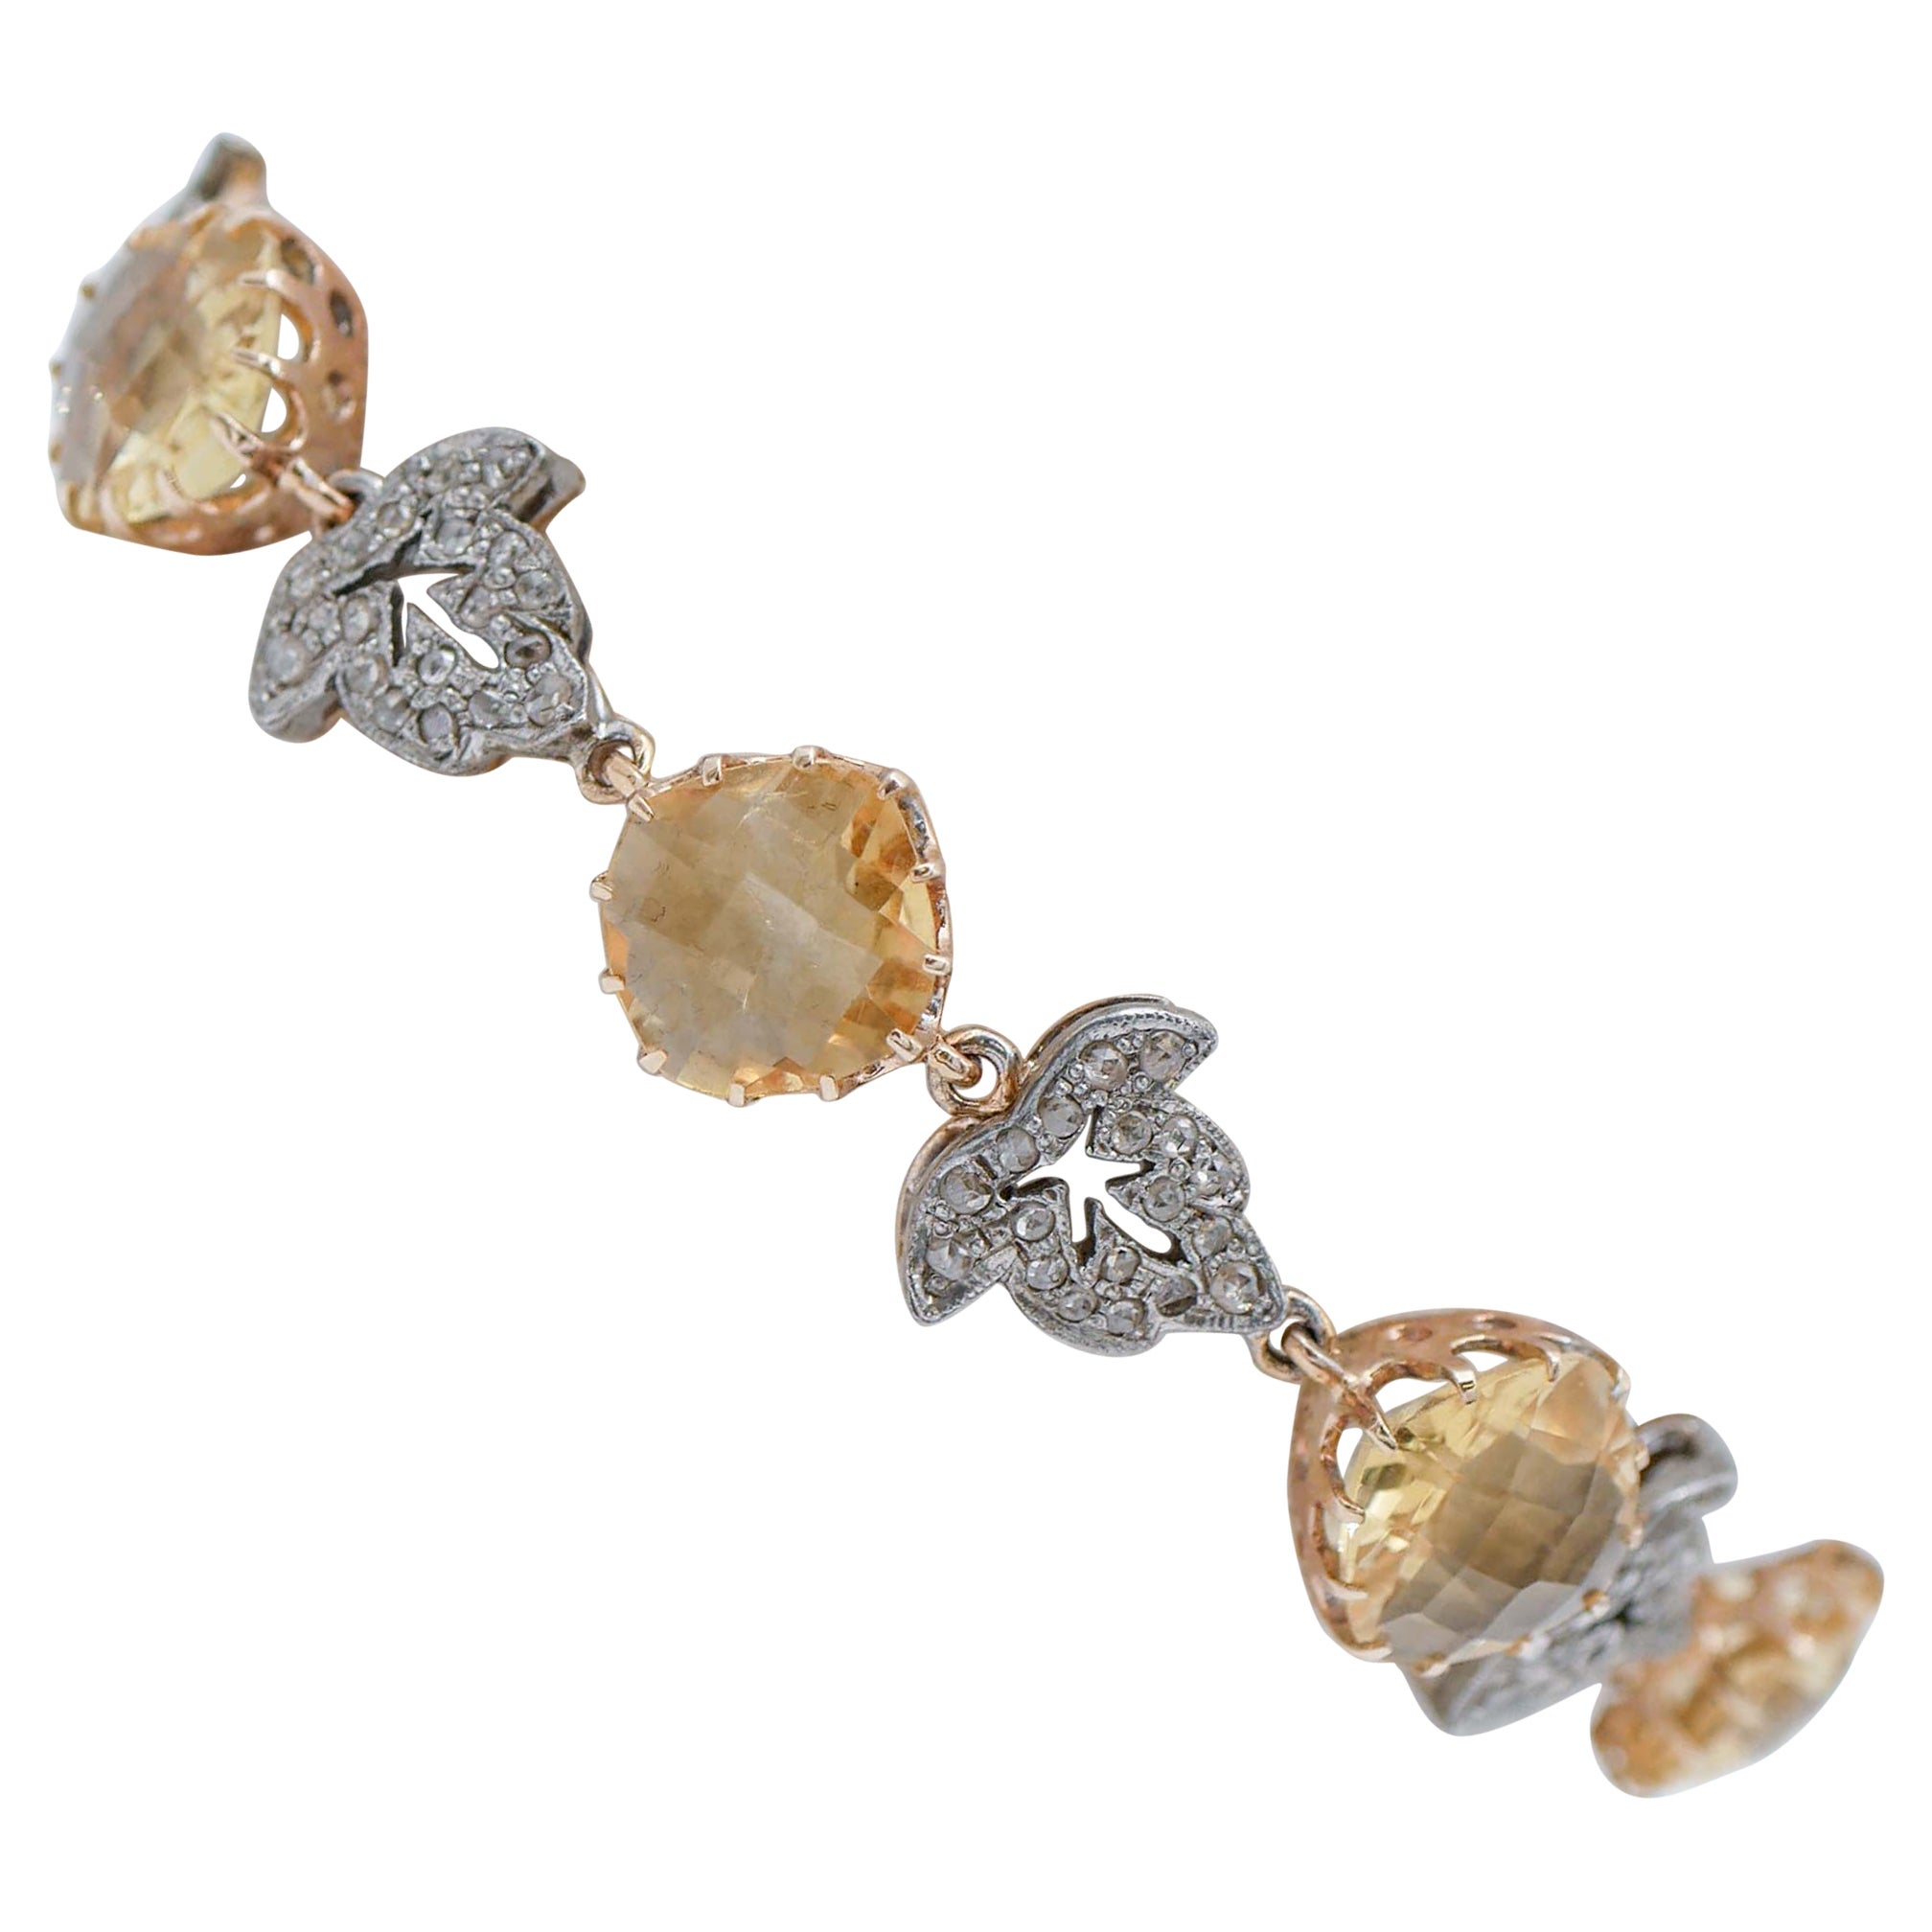 Diamonds, Yellow Topaz, Rose Gold and Silver Bracelet For Sale